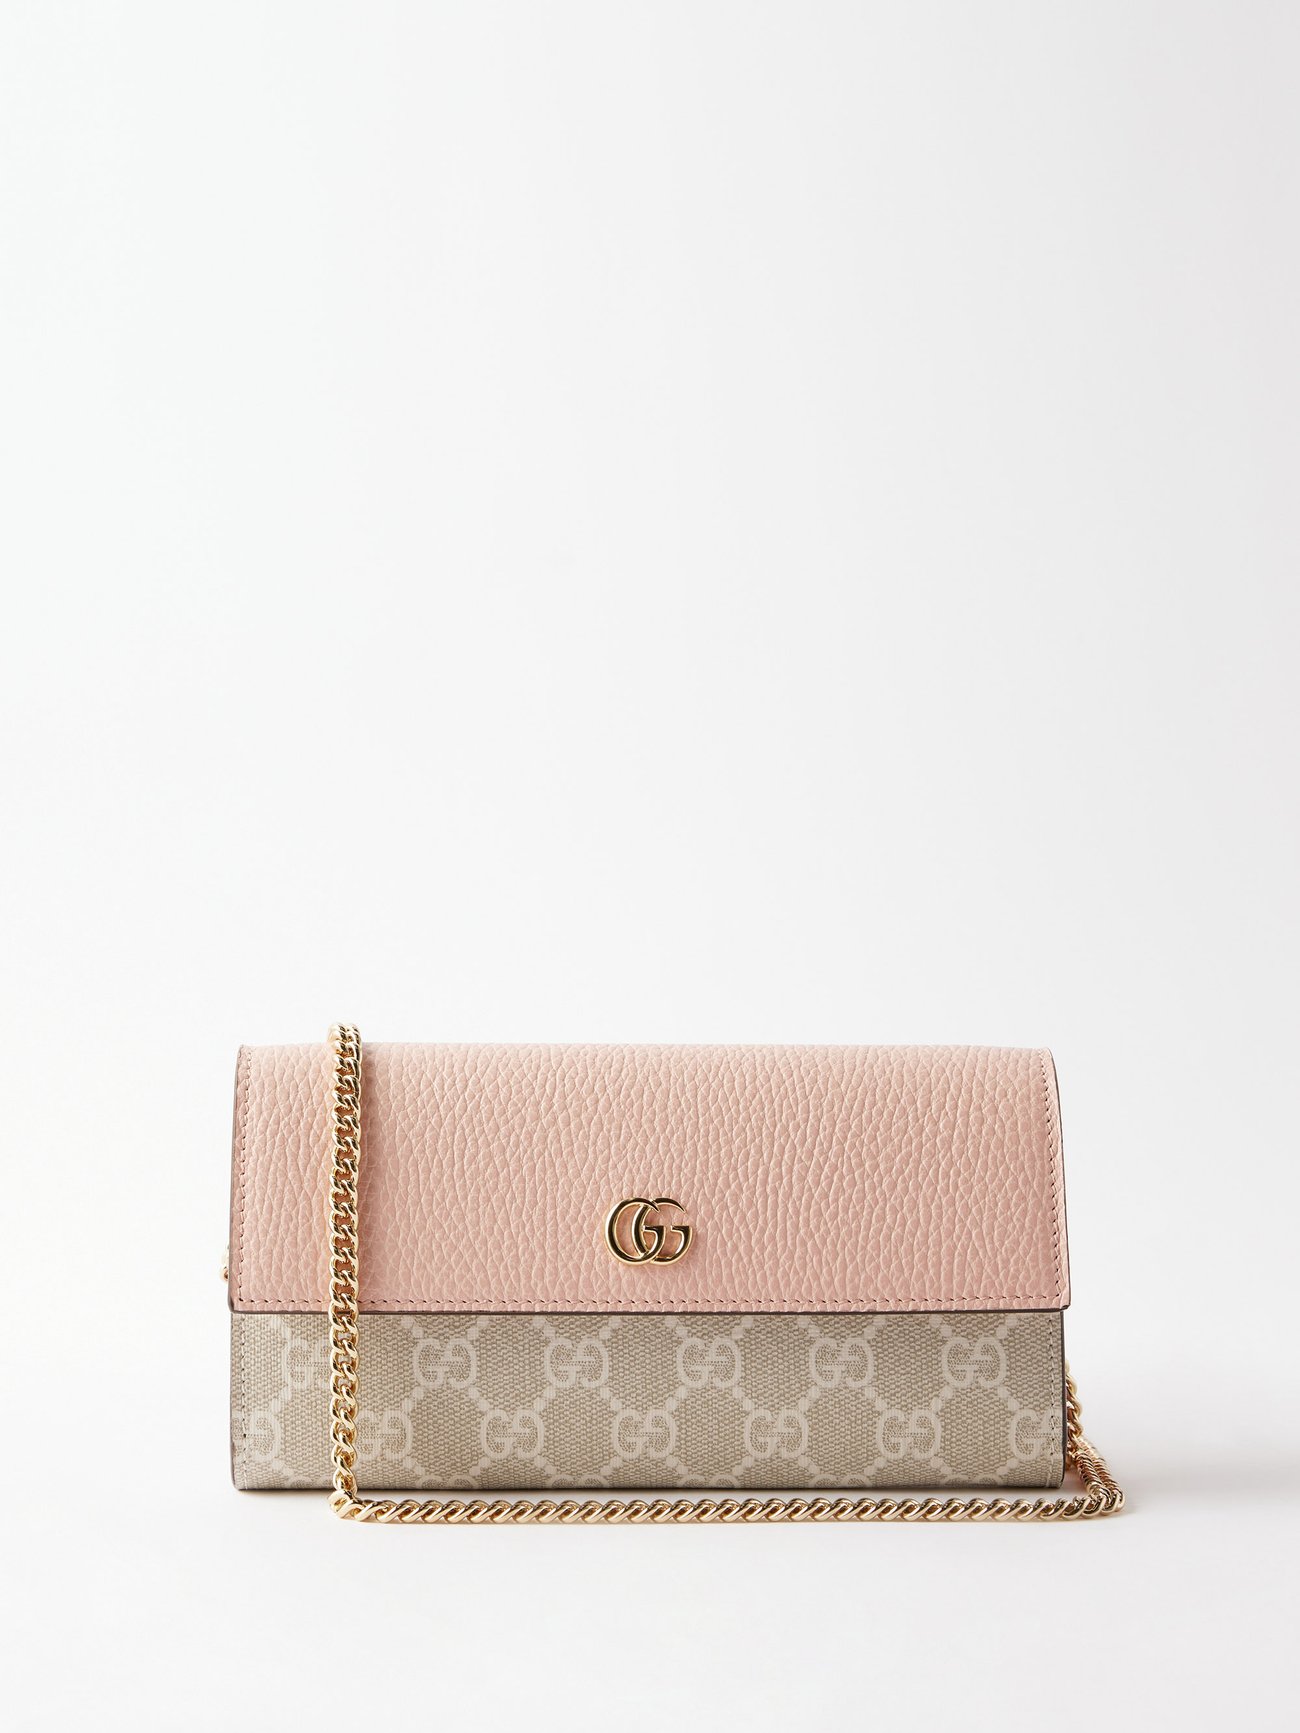 Gucci Key Pouch | GG Leather Clip With Key Chain Pink | BagBuyBuy